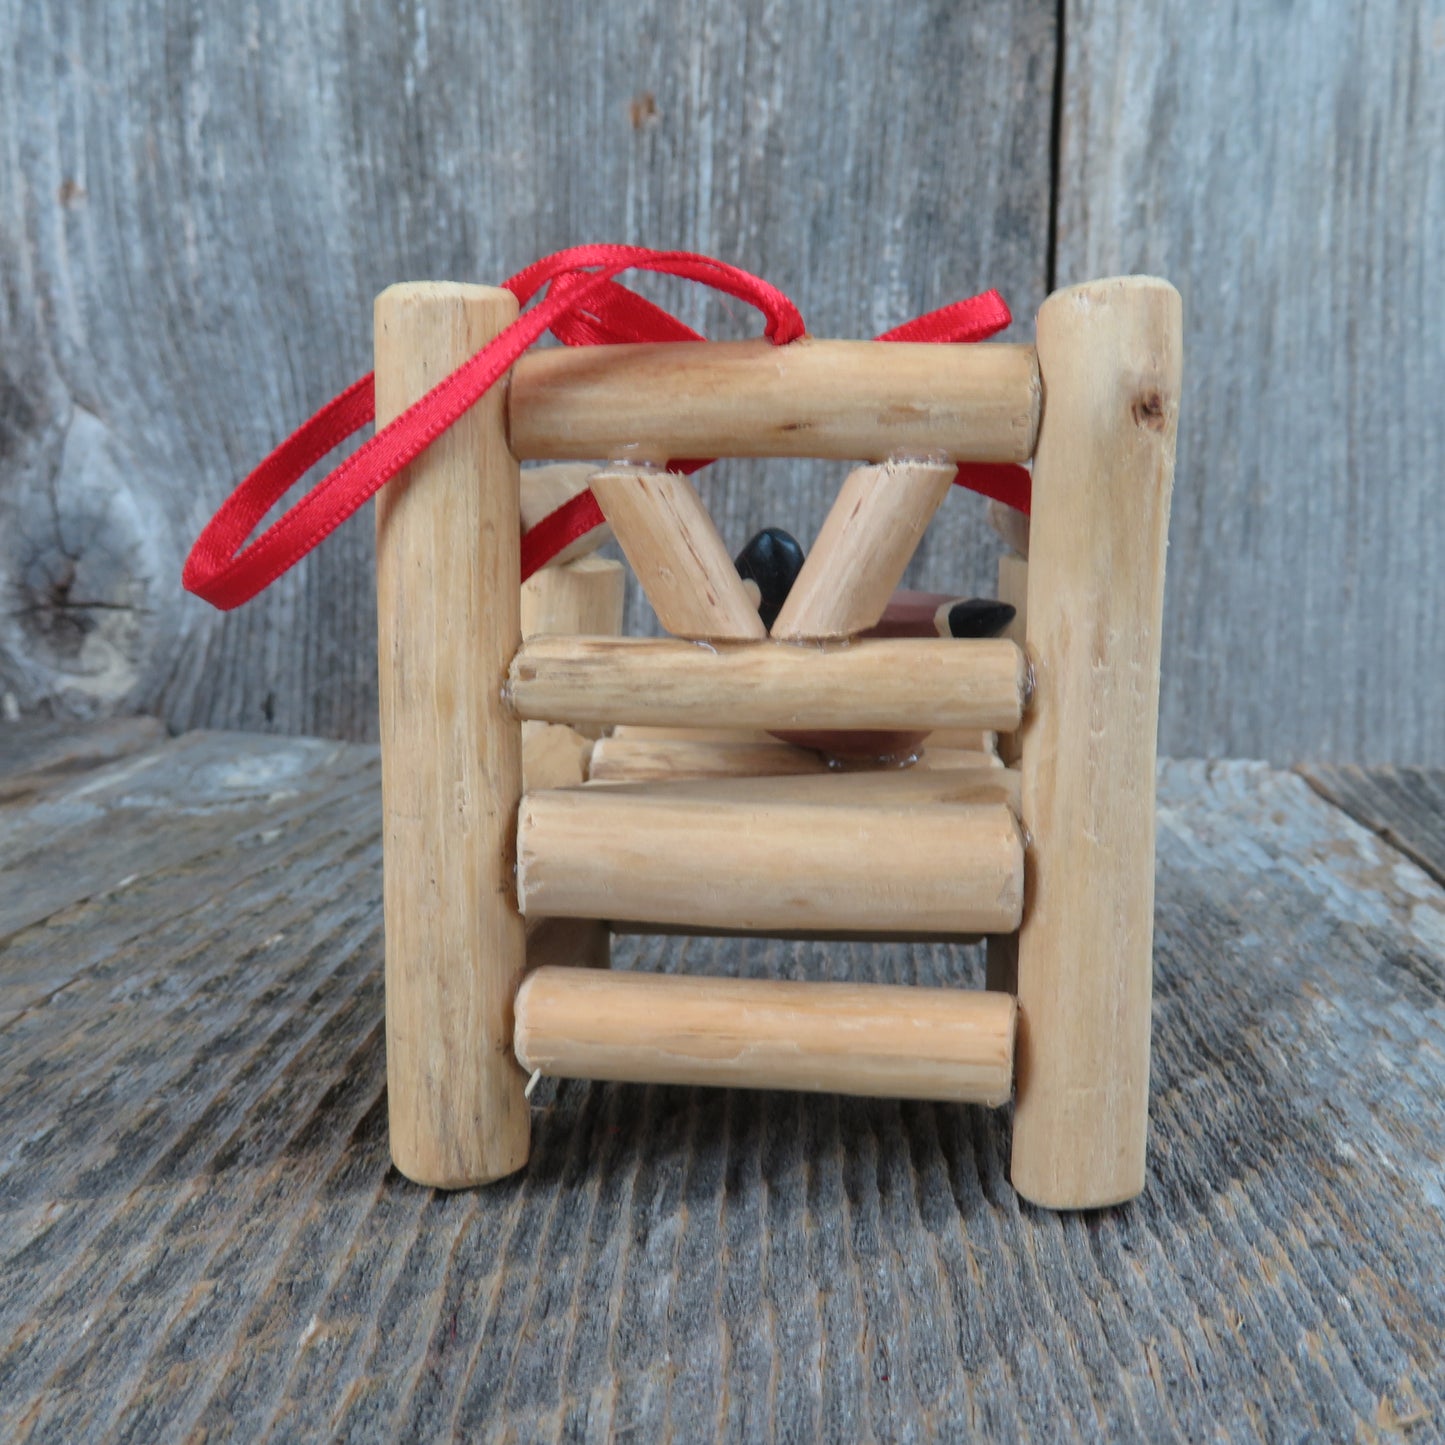 Rough Hewn Log Chair Ornament Wood Duck Wooden Rustic Cabin Christmas Midwest - At Grandma's Table